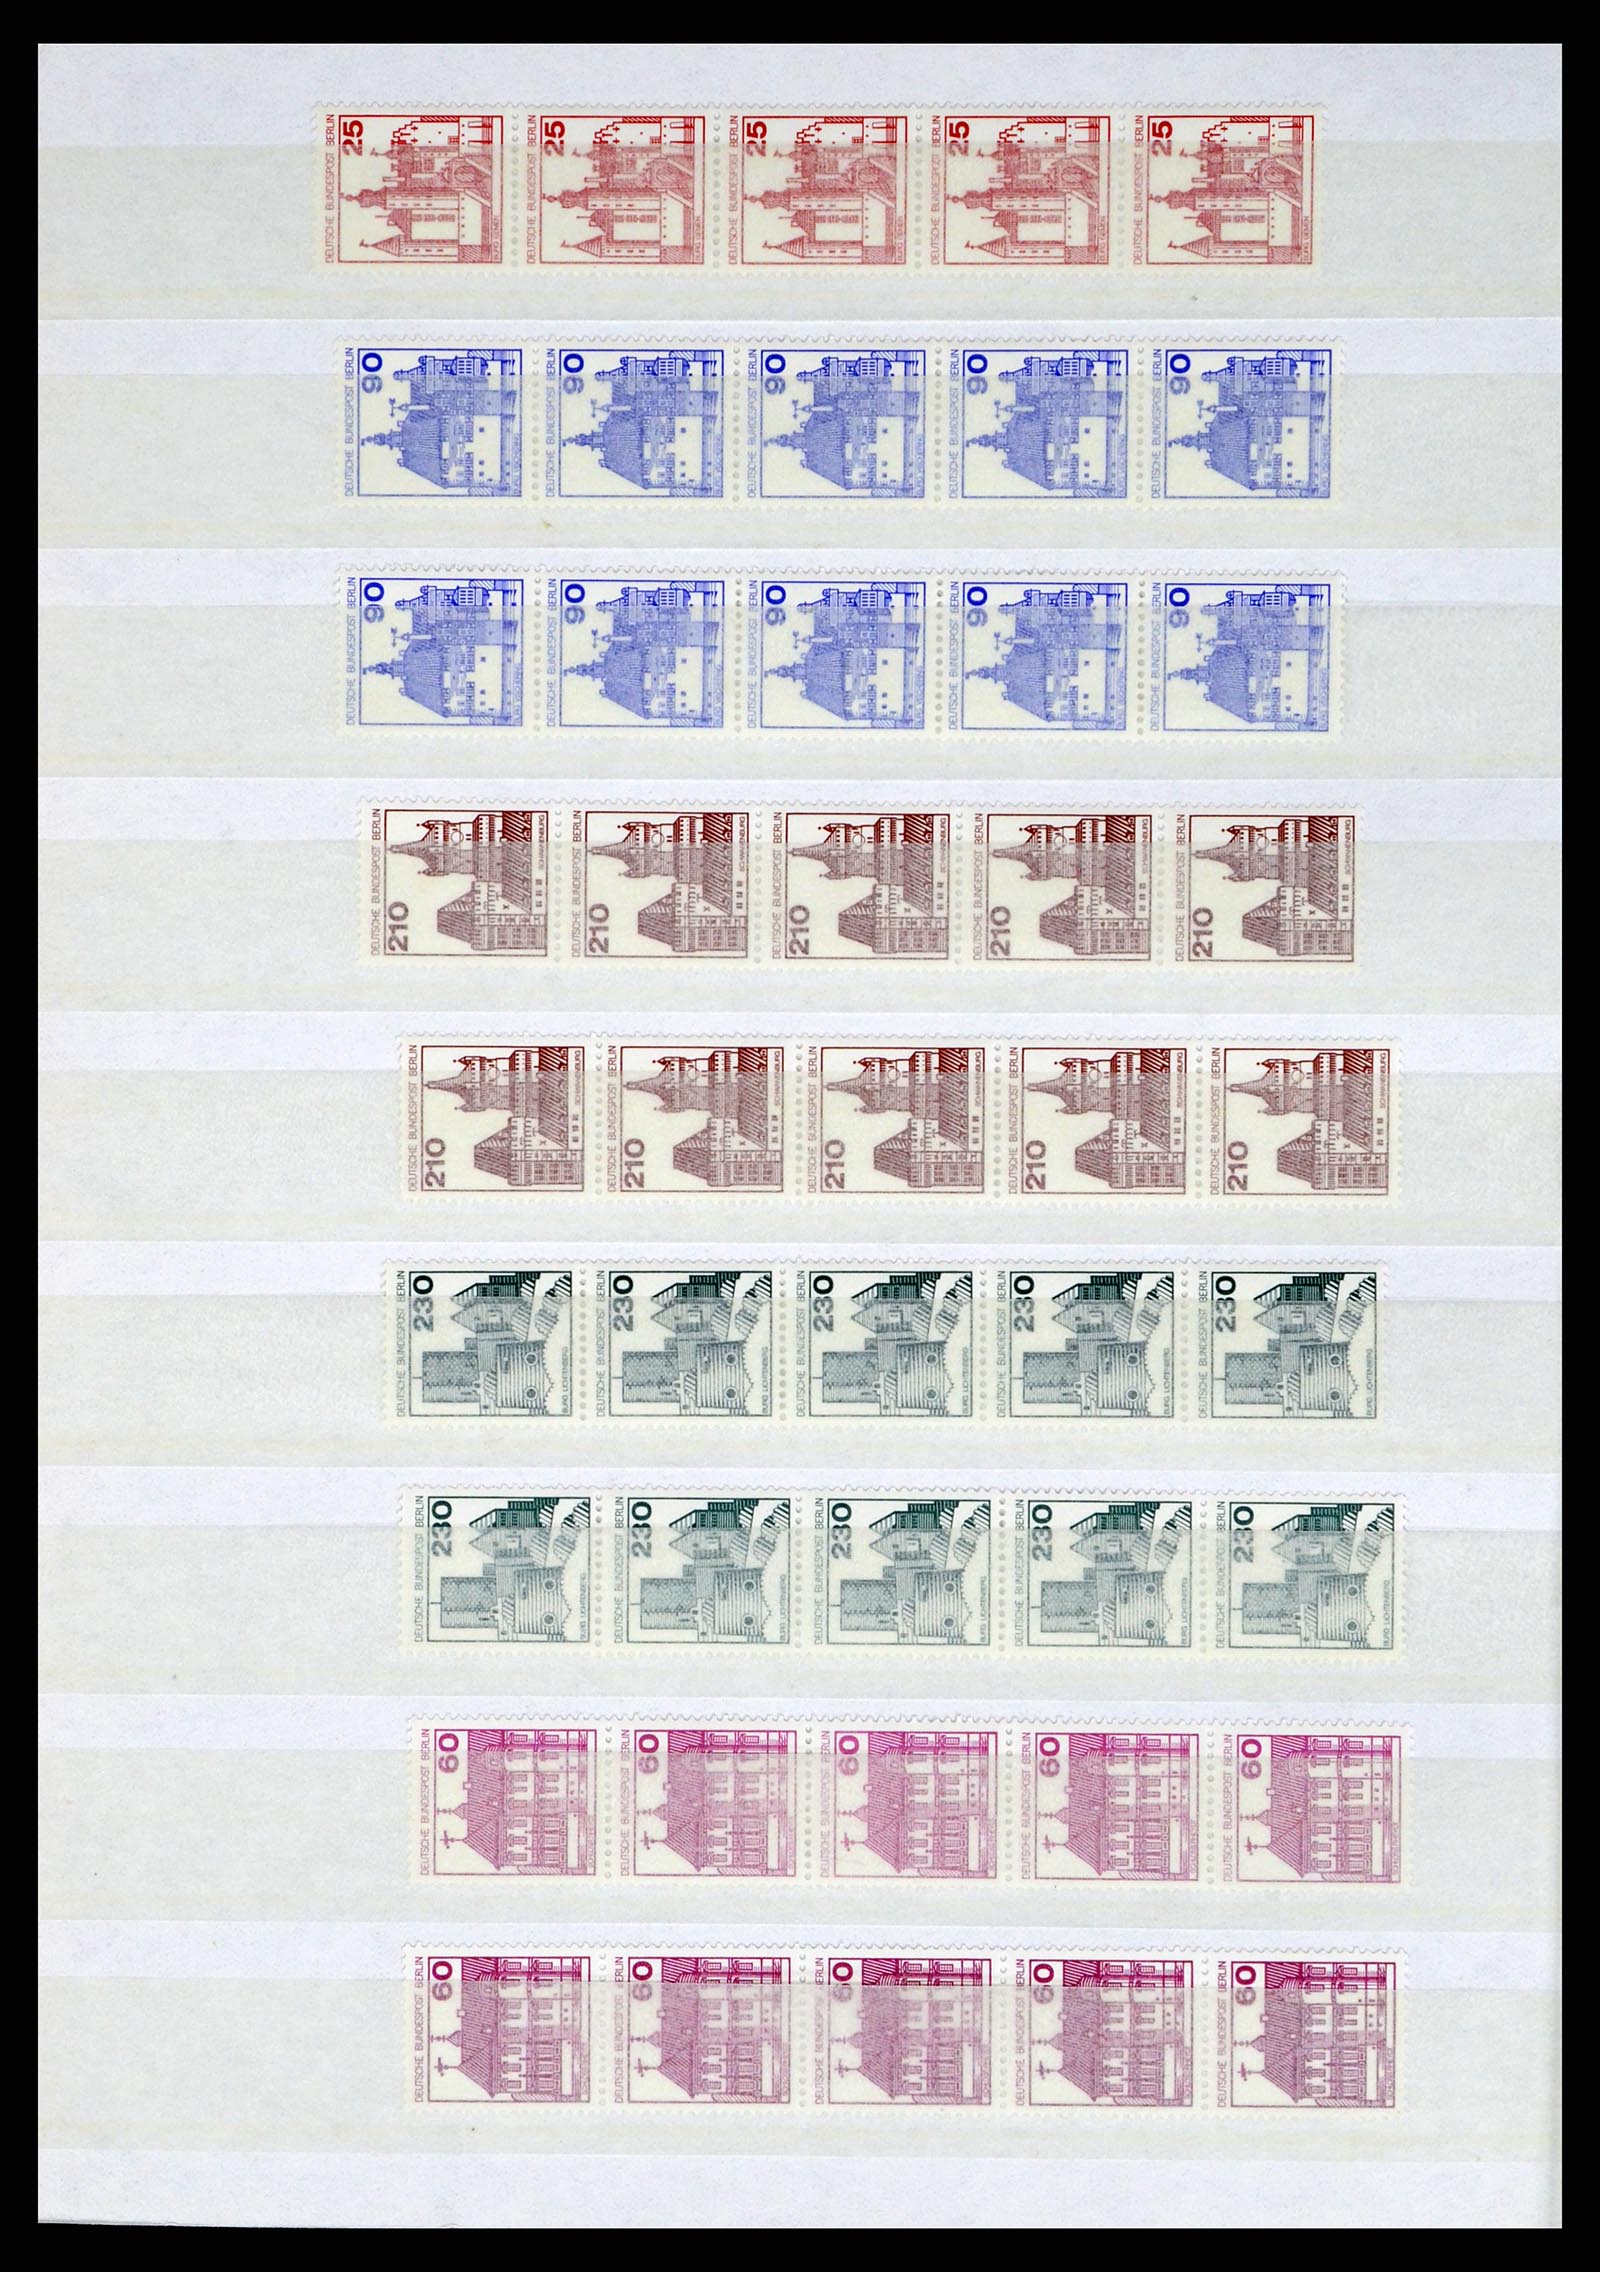 37354 091 - Stamp collection 37354 Bundespost and Berlin 1955-2000.